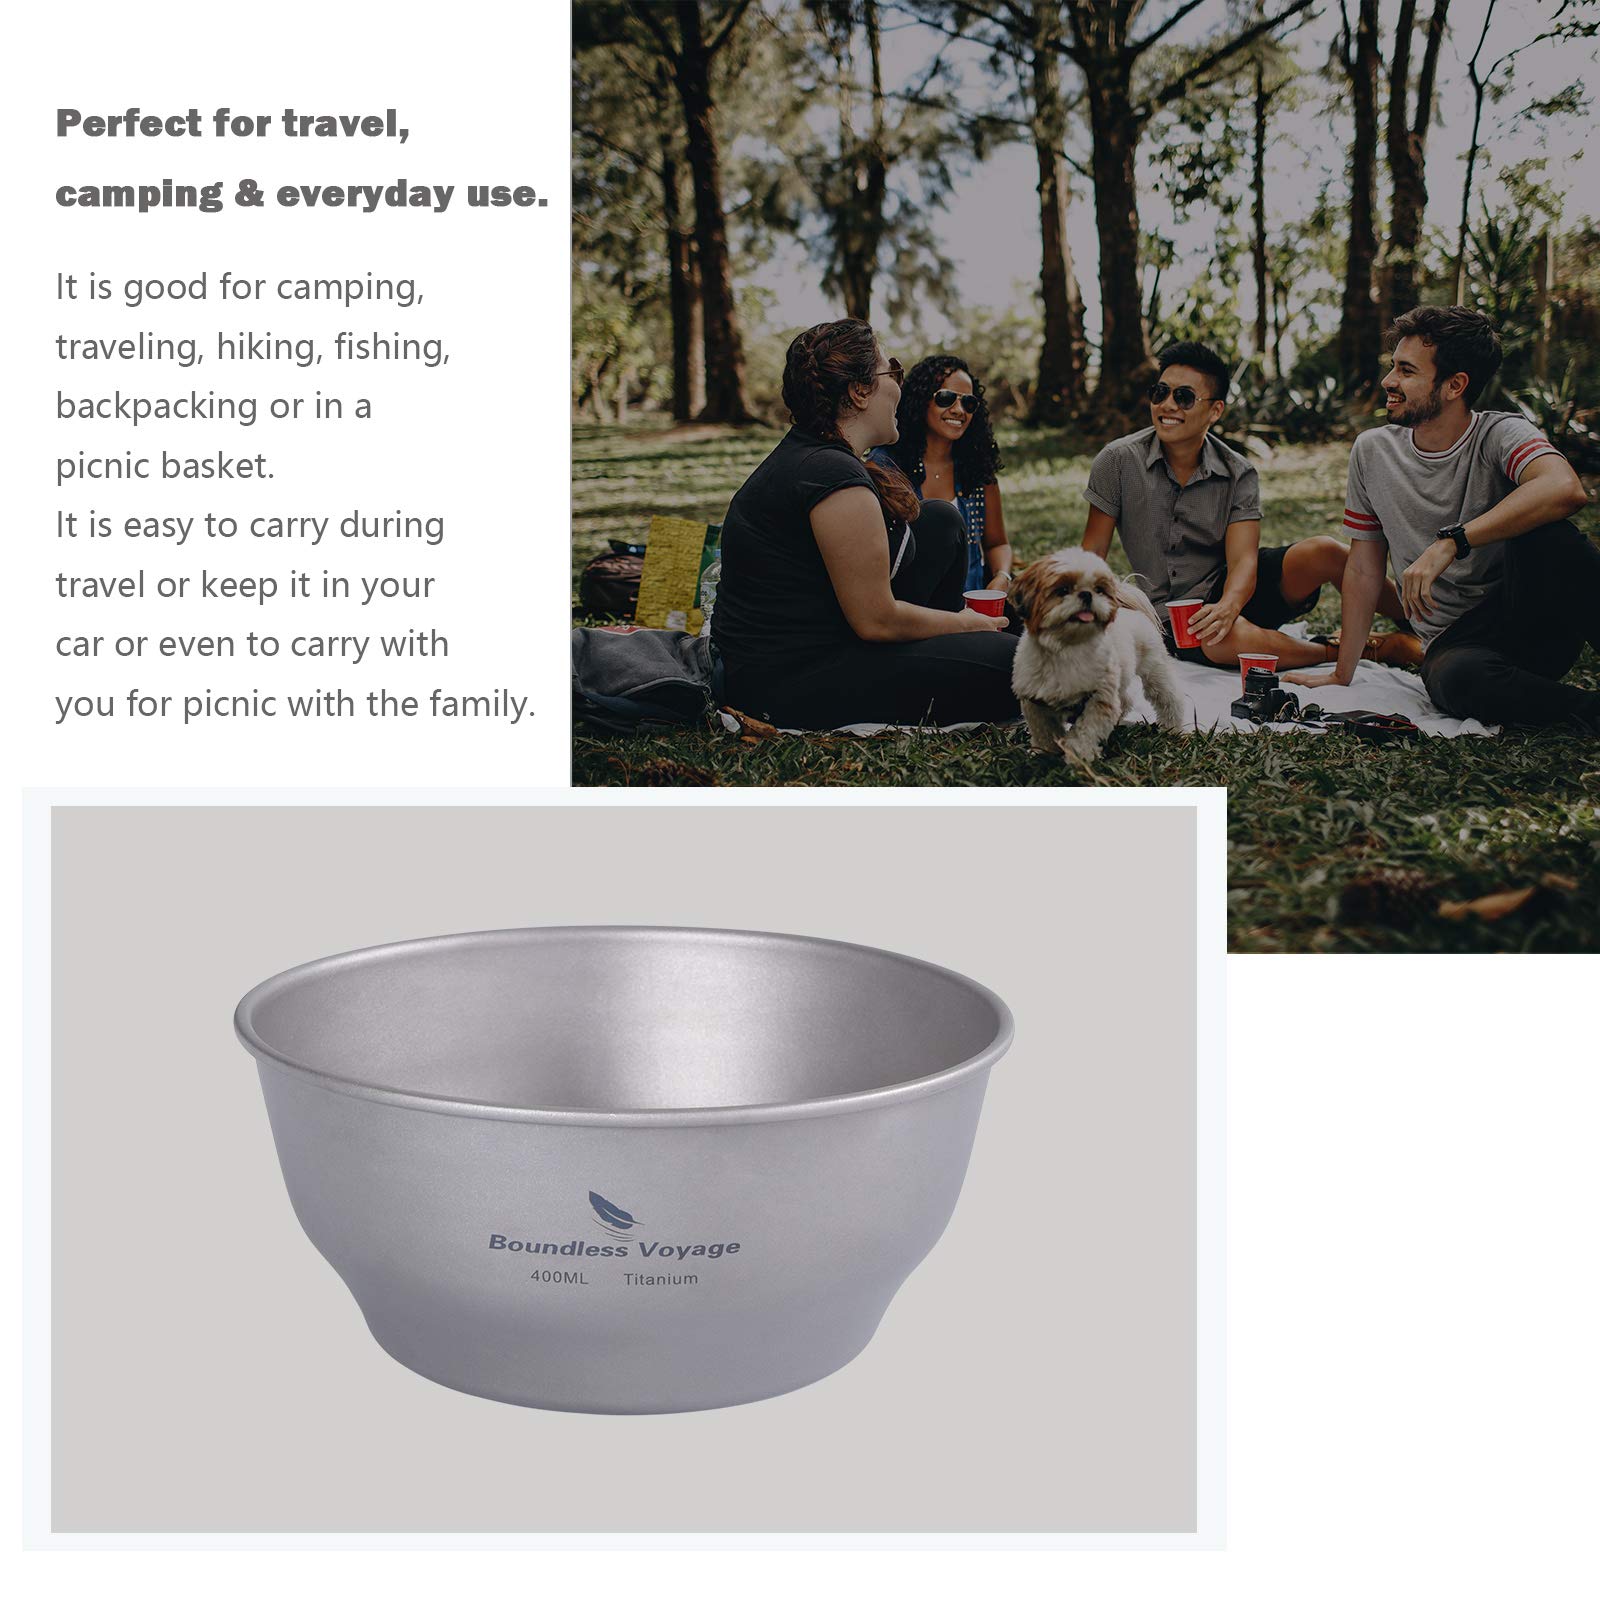 Boundless Voyage 400ml Camping Titanium Single-Walled Bowls Lightweight for Outdoor Hiking Dinnerware A-Ti1105T